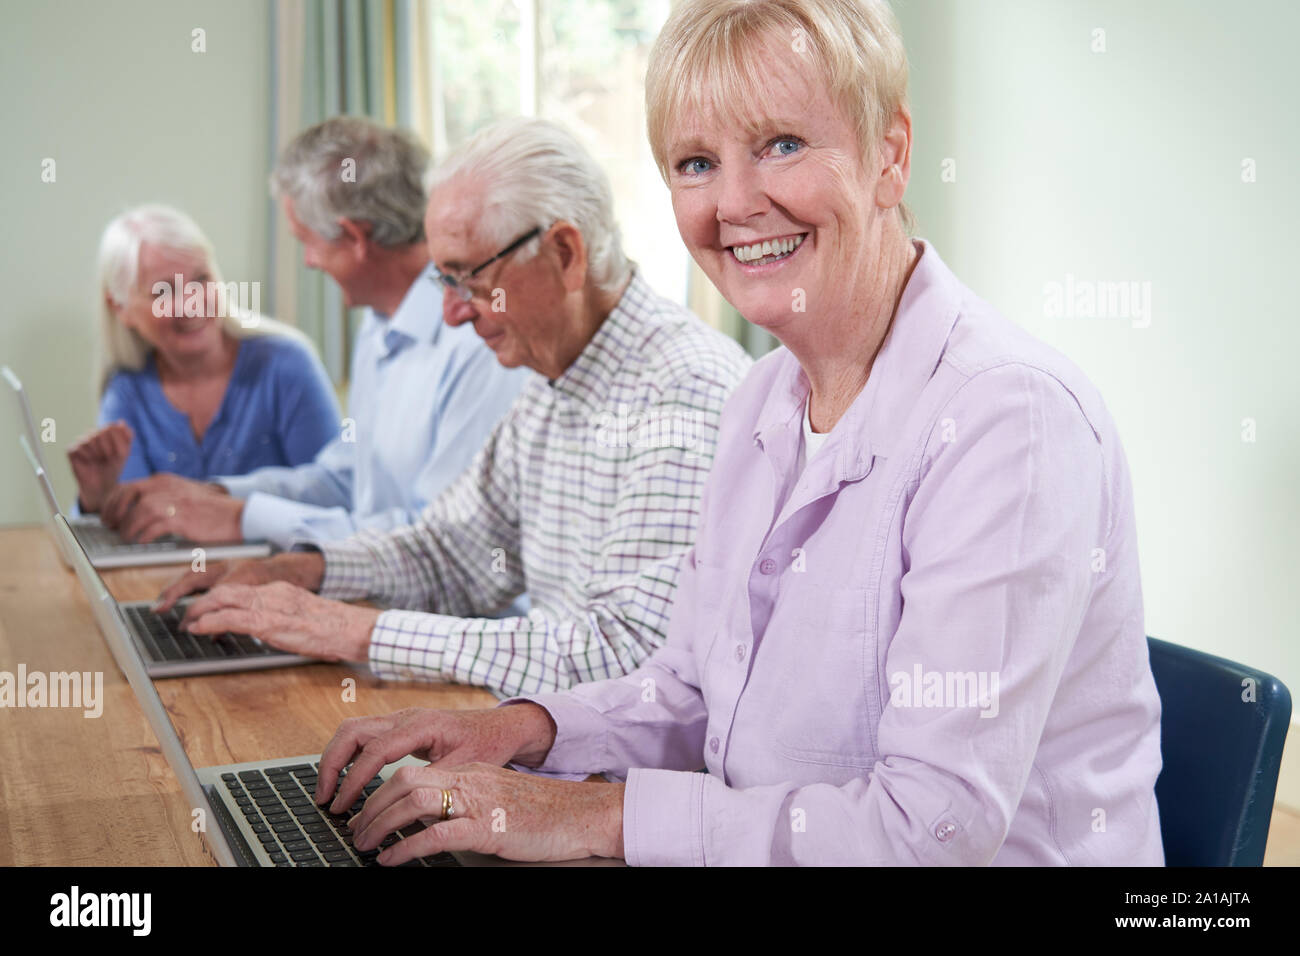 Portrait Of Senior Woman With Tutor In Computer Class Stock Photo